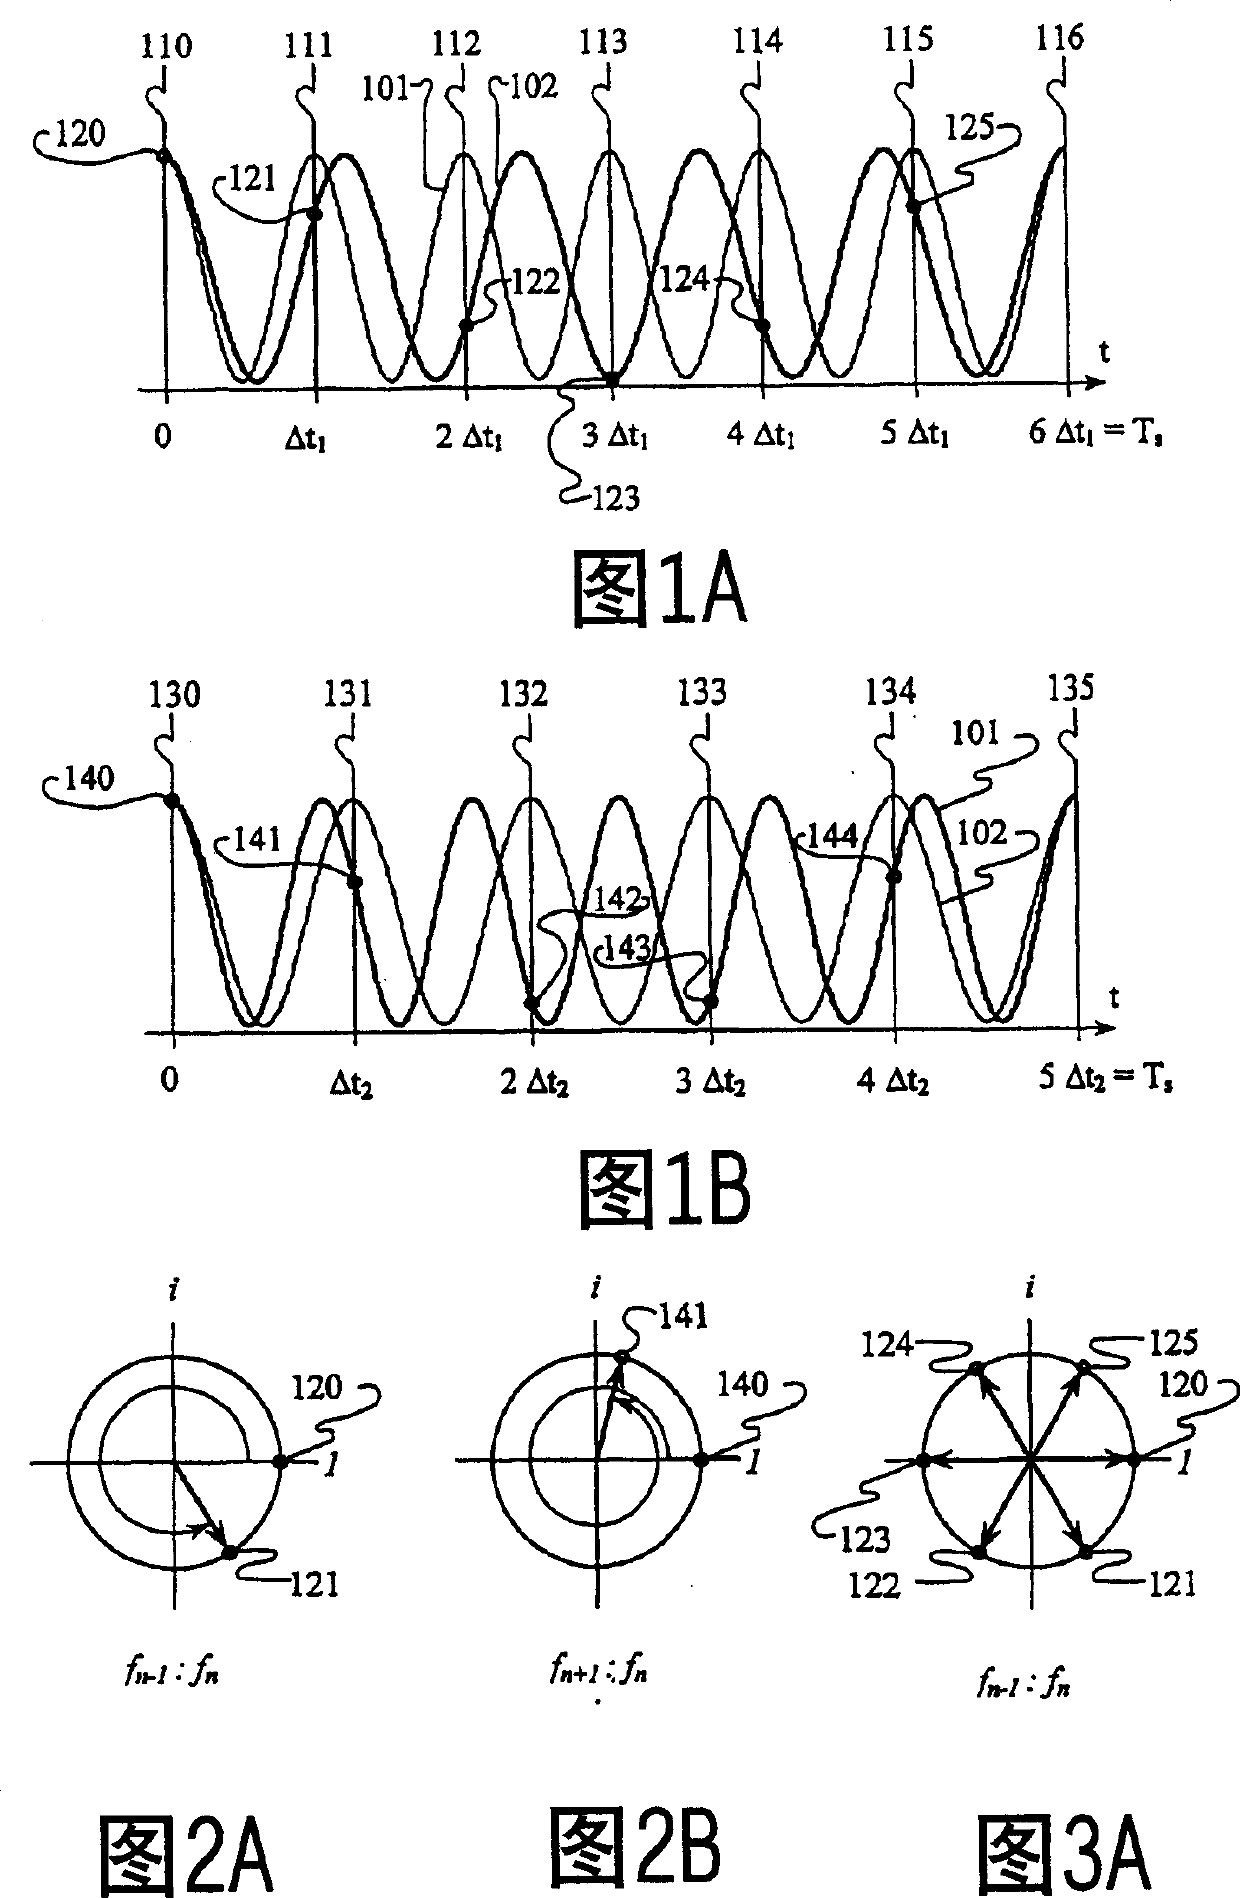 Carrier interferometry coding and multicarrier processing